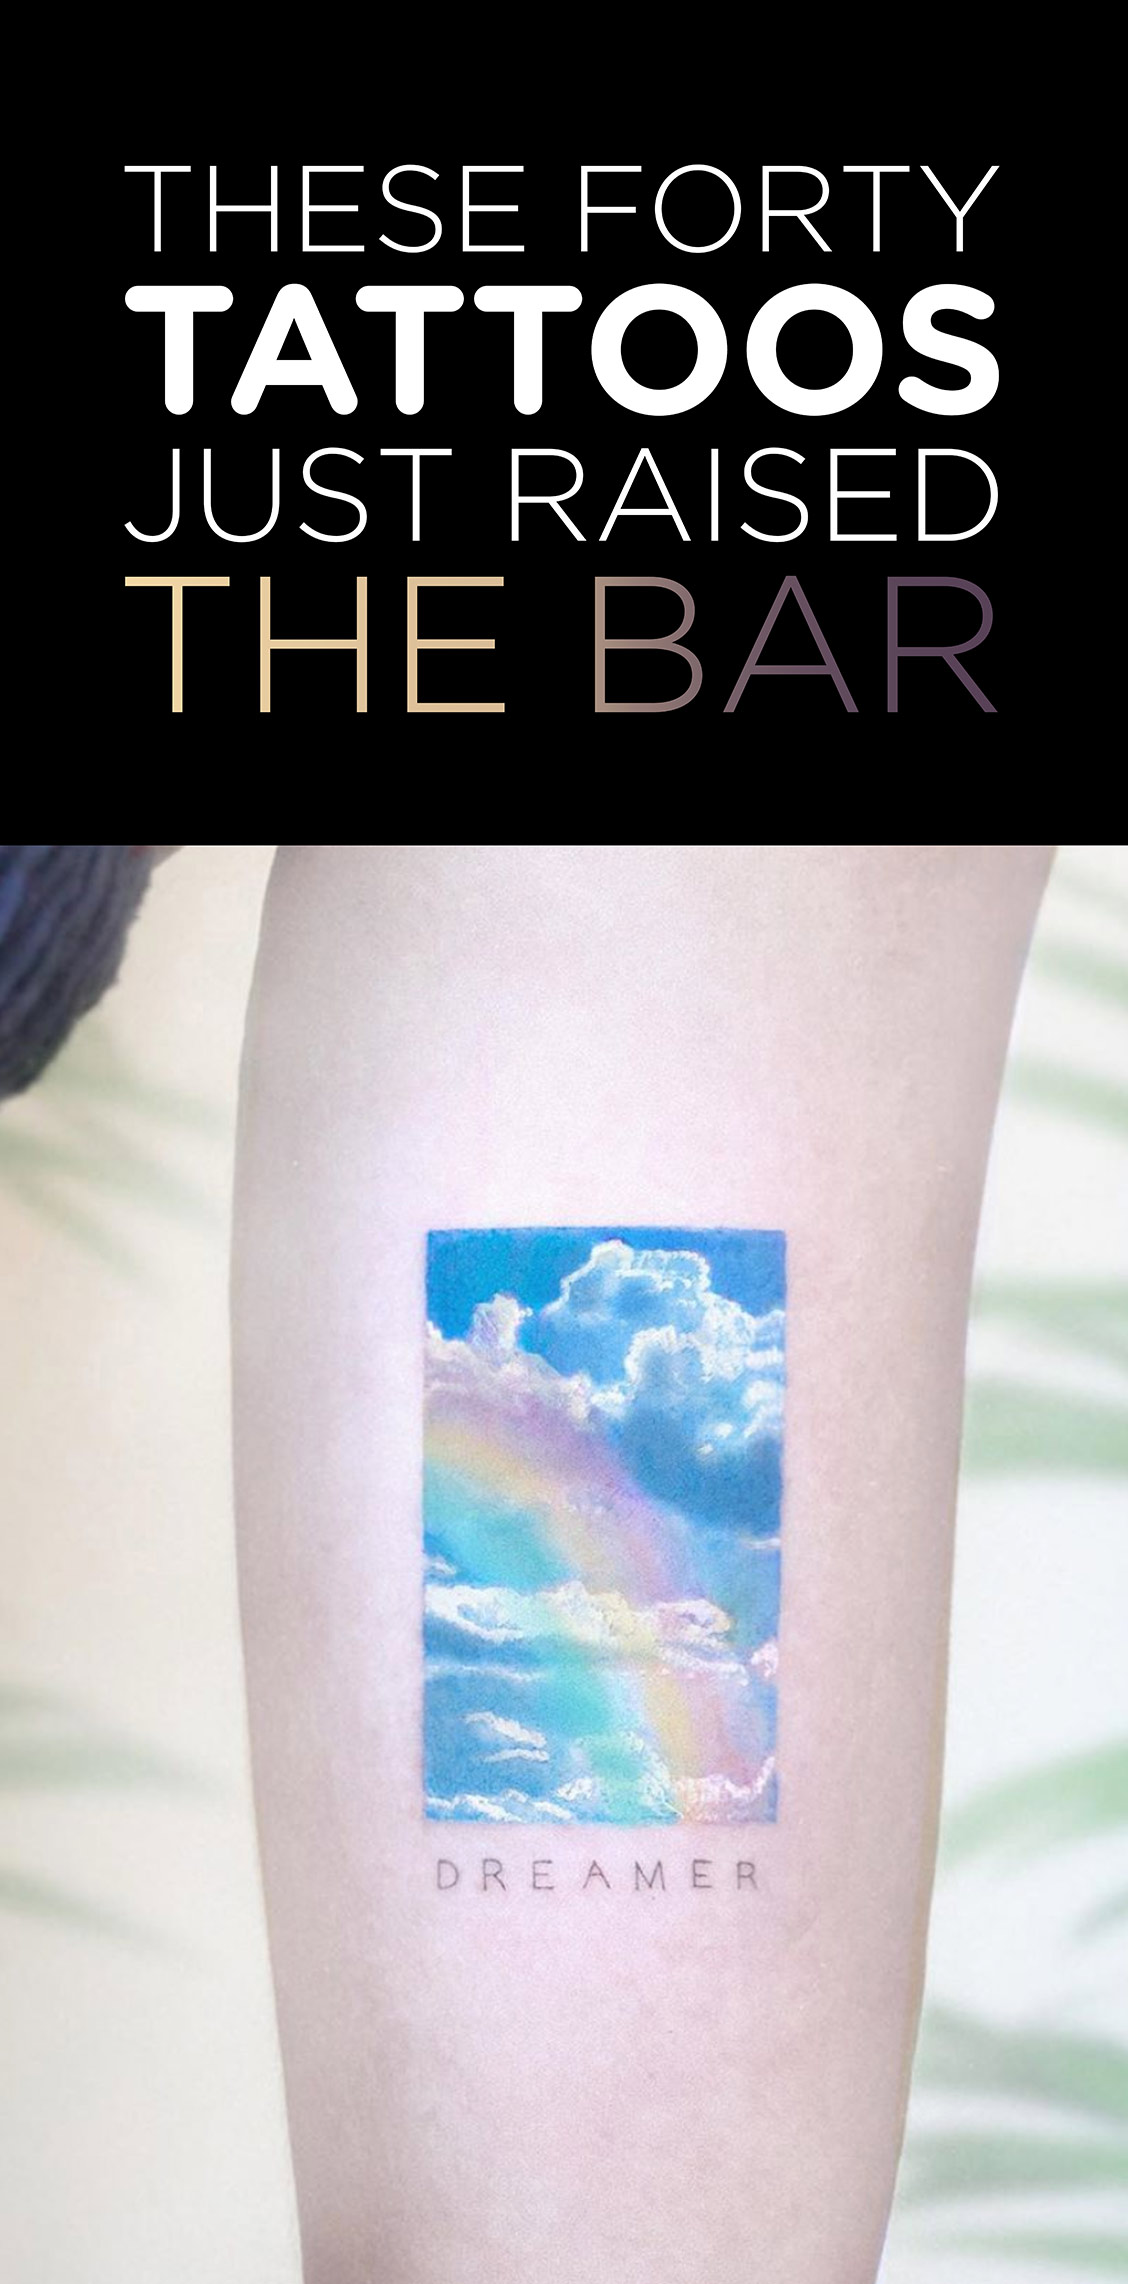 Girls, these 40 tattoos just raised the bar